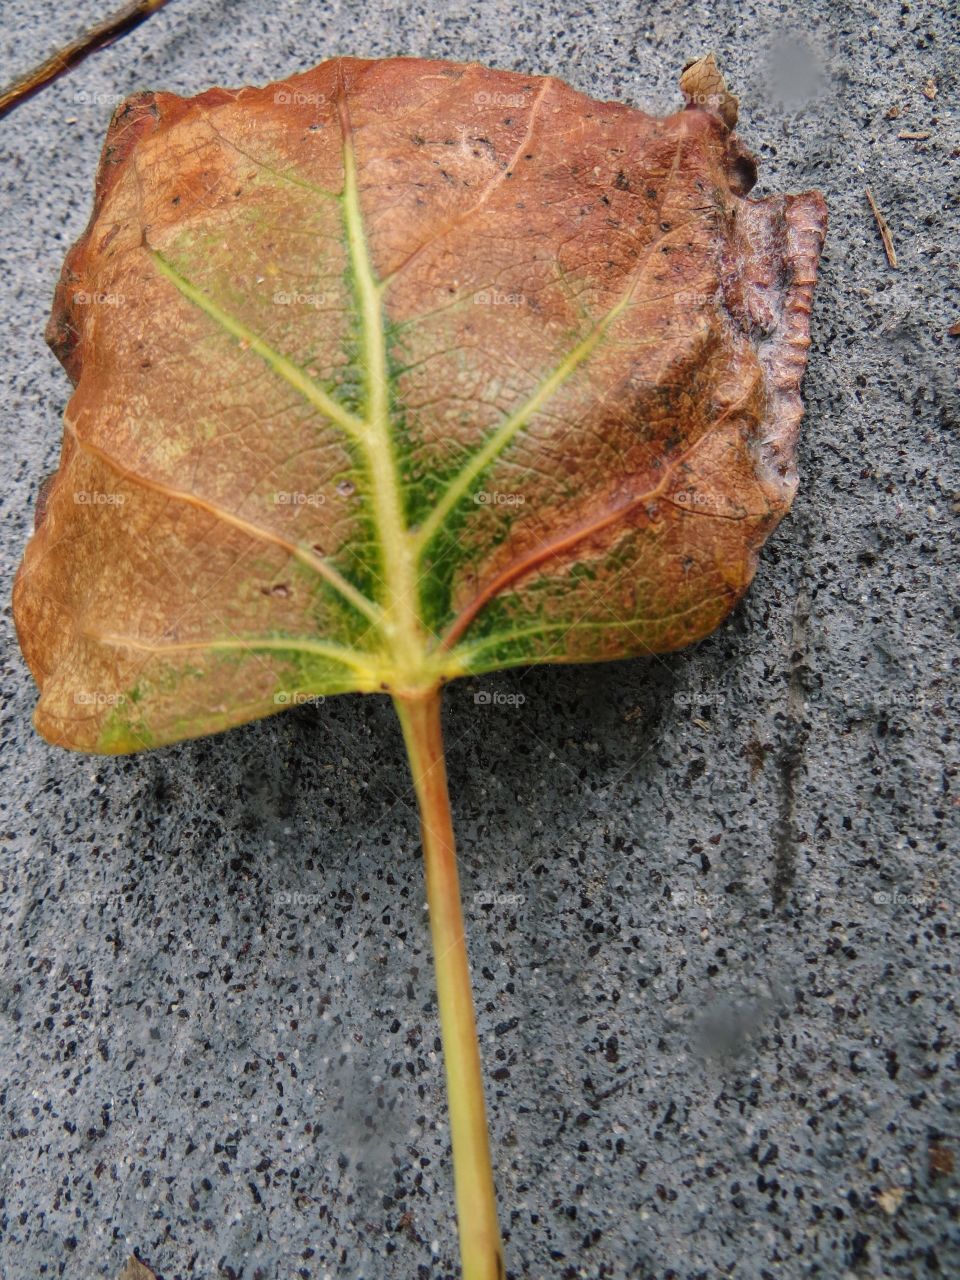 A single orange and green leaf with a yellow stem